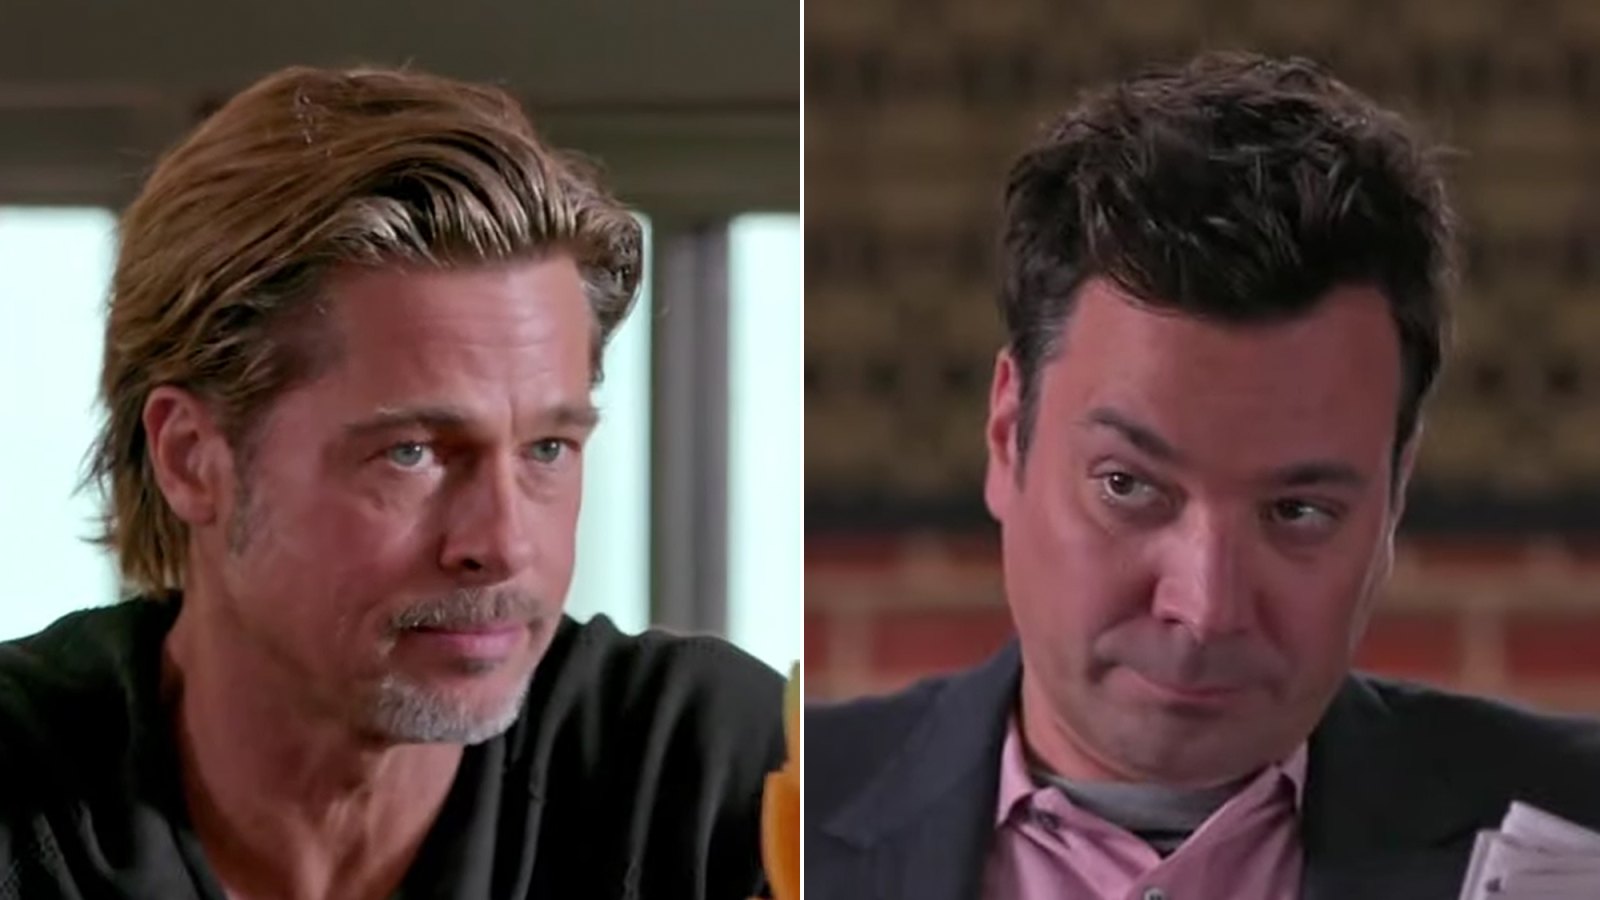 Brad Pitt and Jimmy Fallon Have a Gentleman’s Food Fight on ‘Tonight Show’